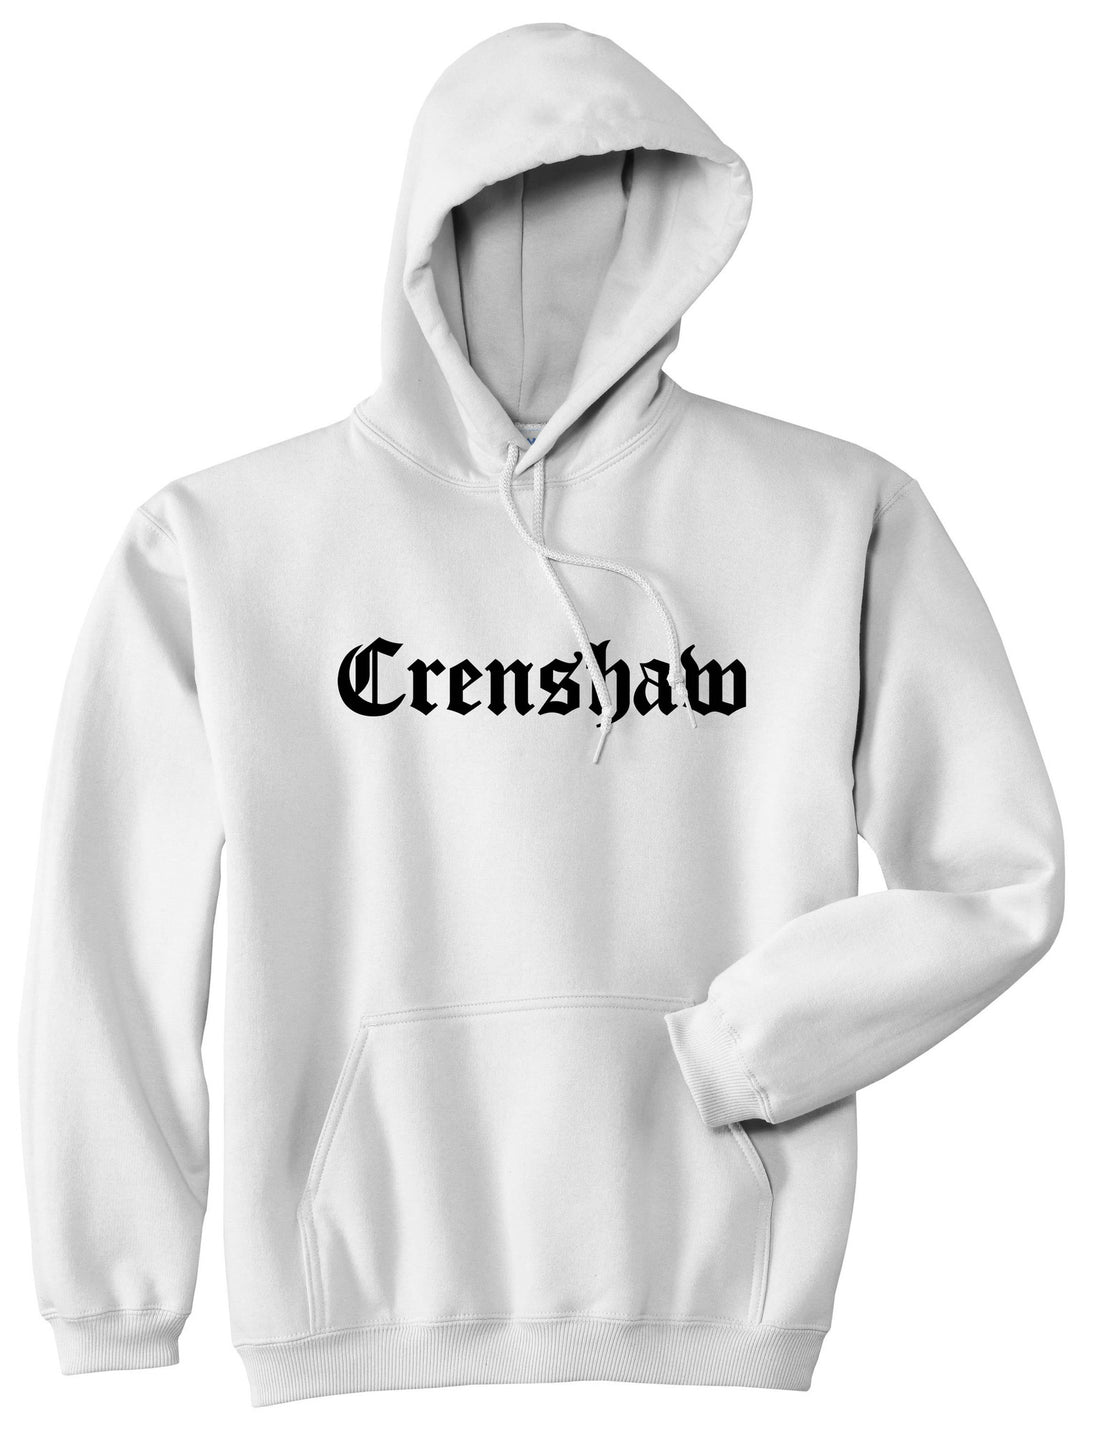 Crenshaw Old English California Pullover Hoodie in White By Kings Of NY